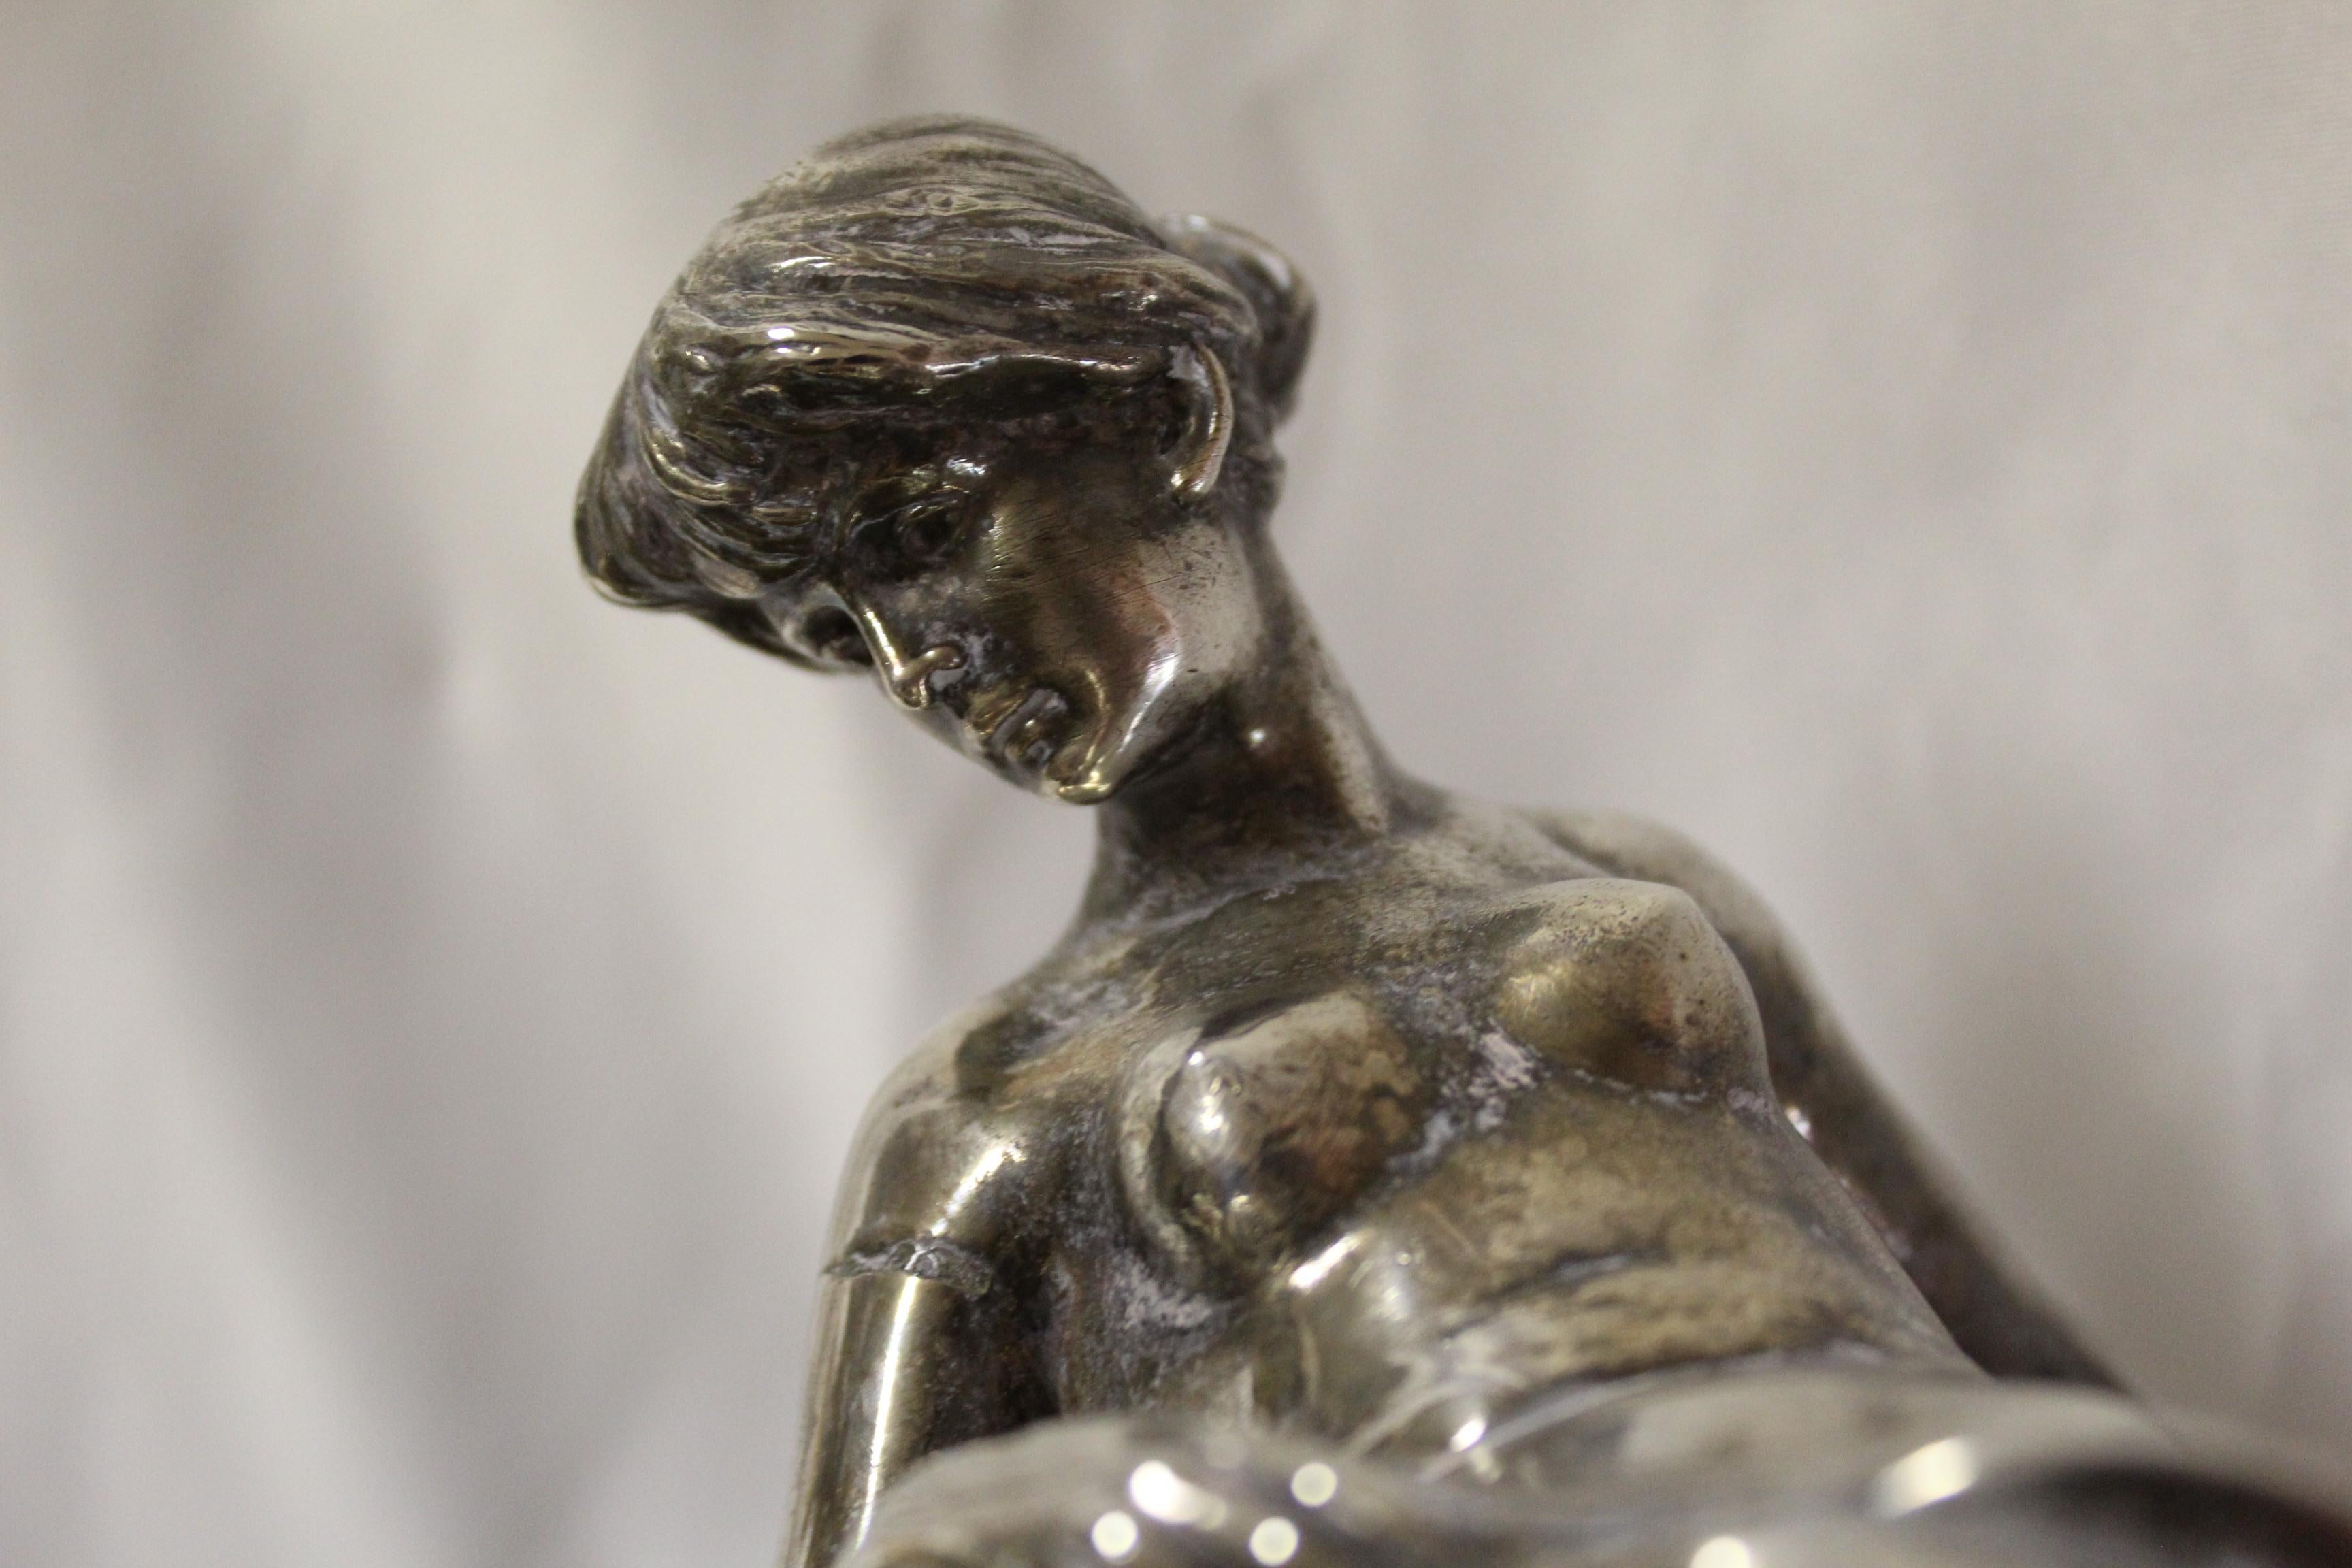 Plated Art Nouveau Vase (Antique )Silver Plate Mermaid, Signed and Dated 1897 For Sale